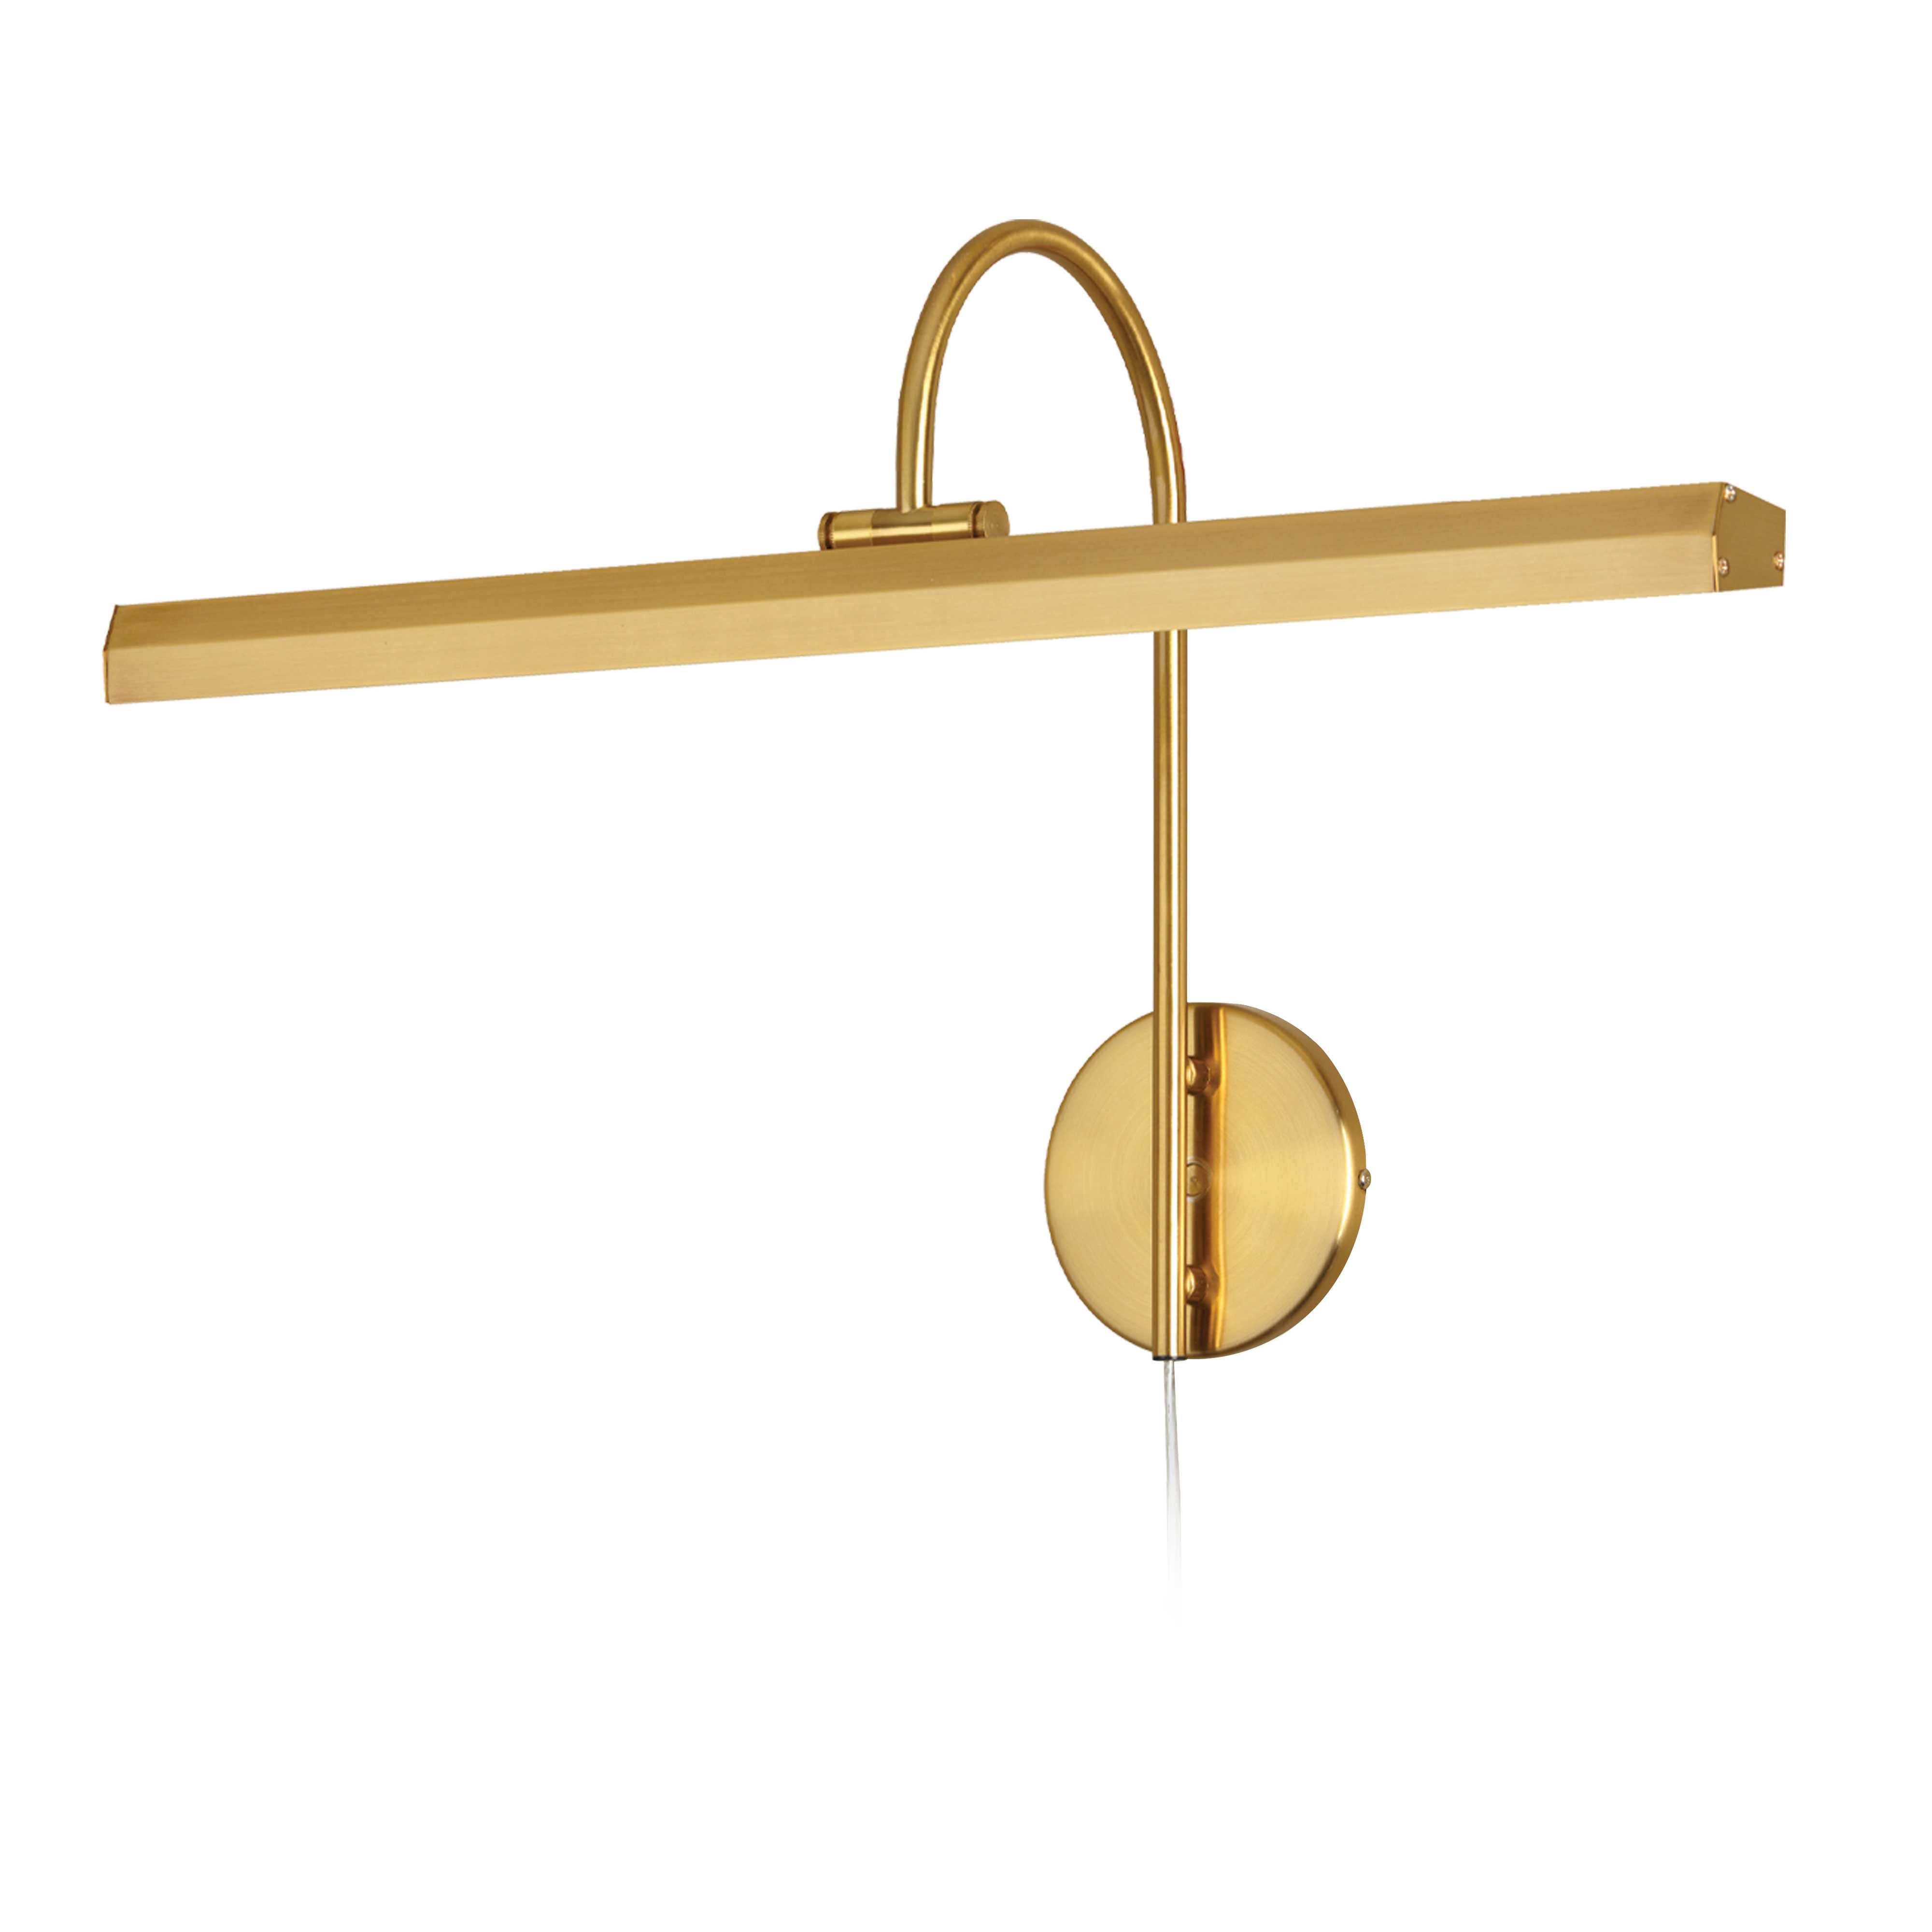 DISPLAY/EXHIBIT Wall sconce à tableau Gold INTEGRATED LED - PIC120-23LED-AGB | DAINOLITE